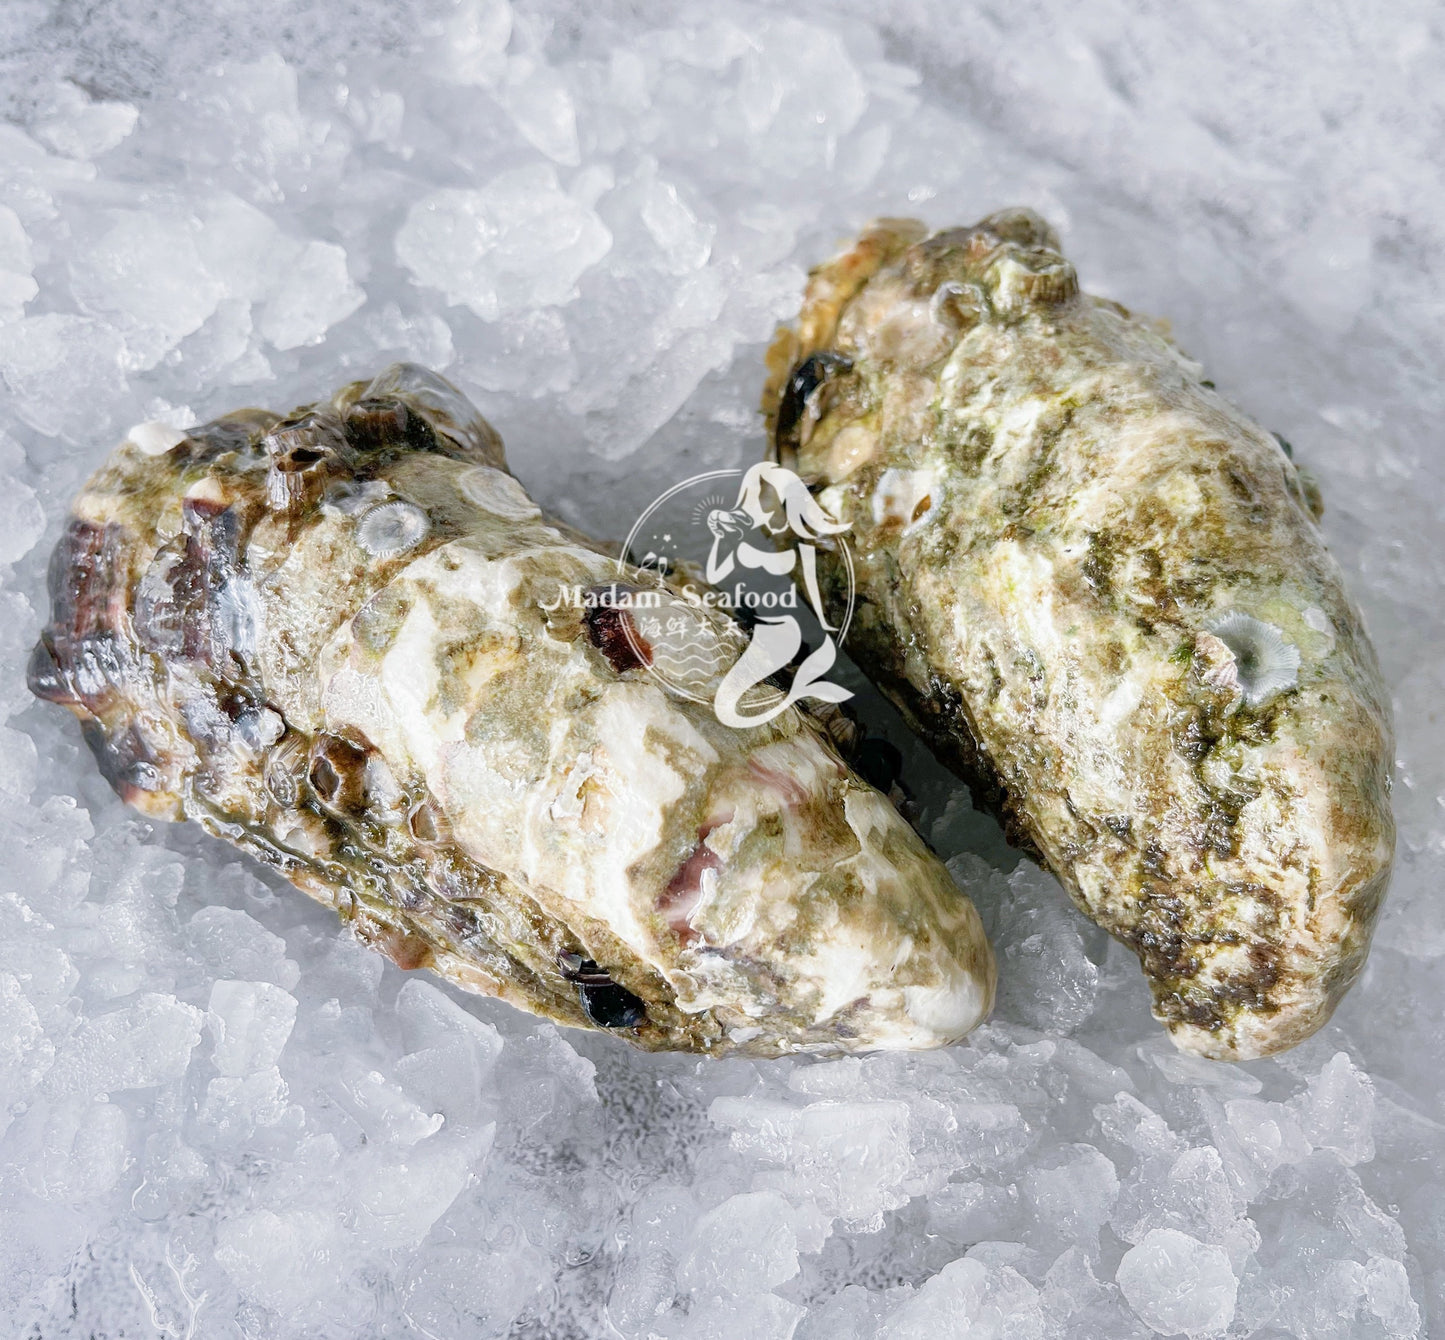 Live SA Pacific Oysters (Jumbo) (closed)